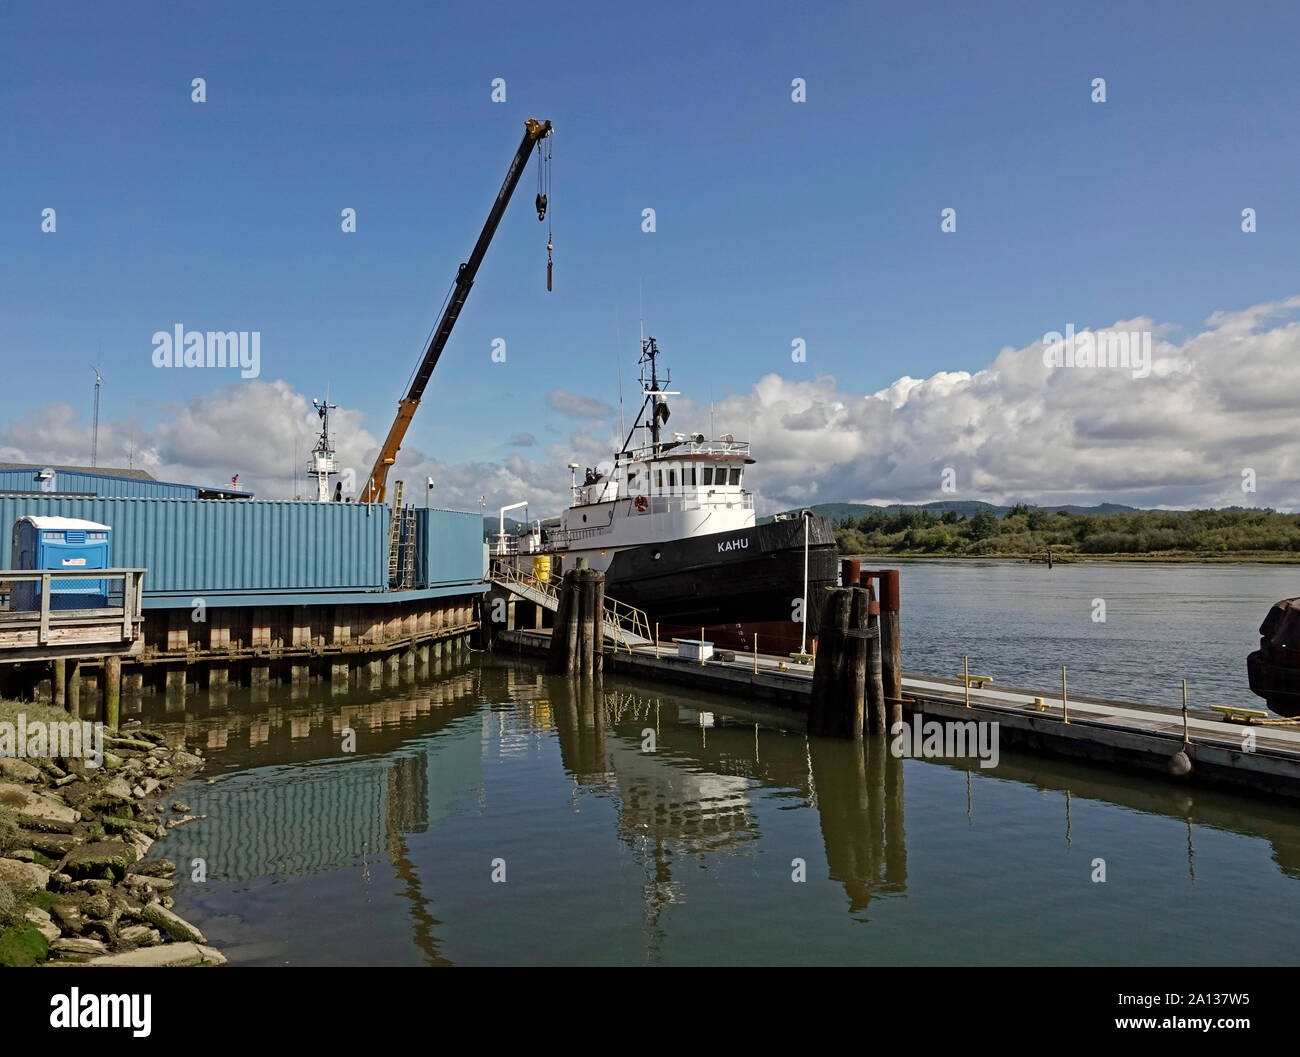 A large river tug tied up at a dock in Coos Bay, Oregon. Stock Photo